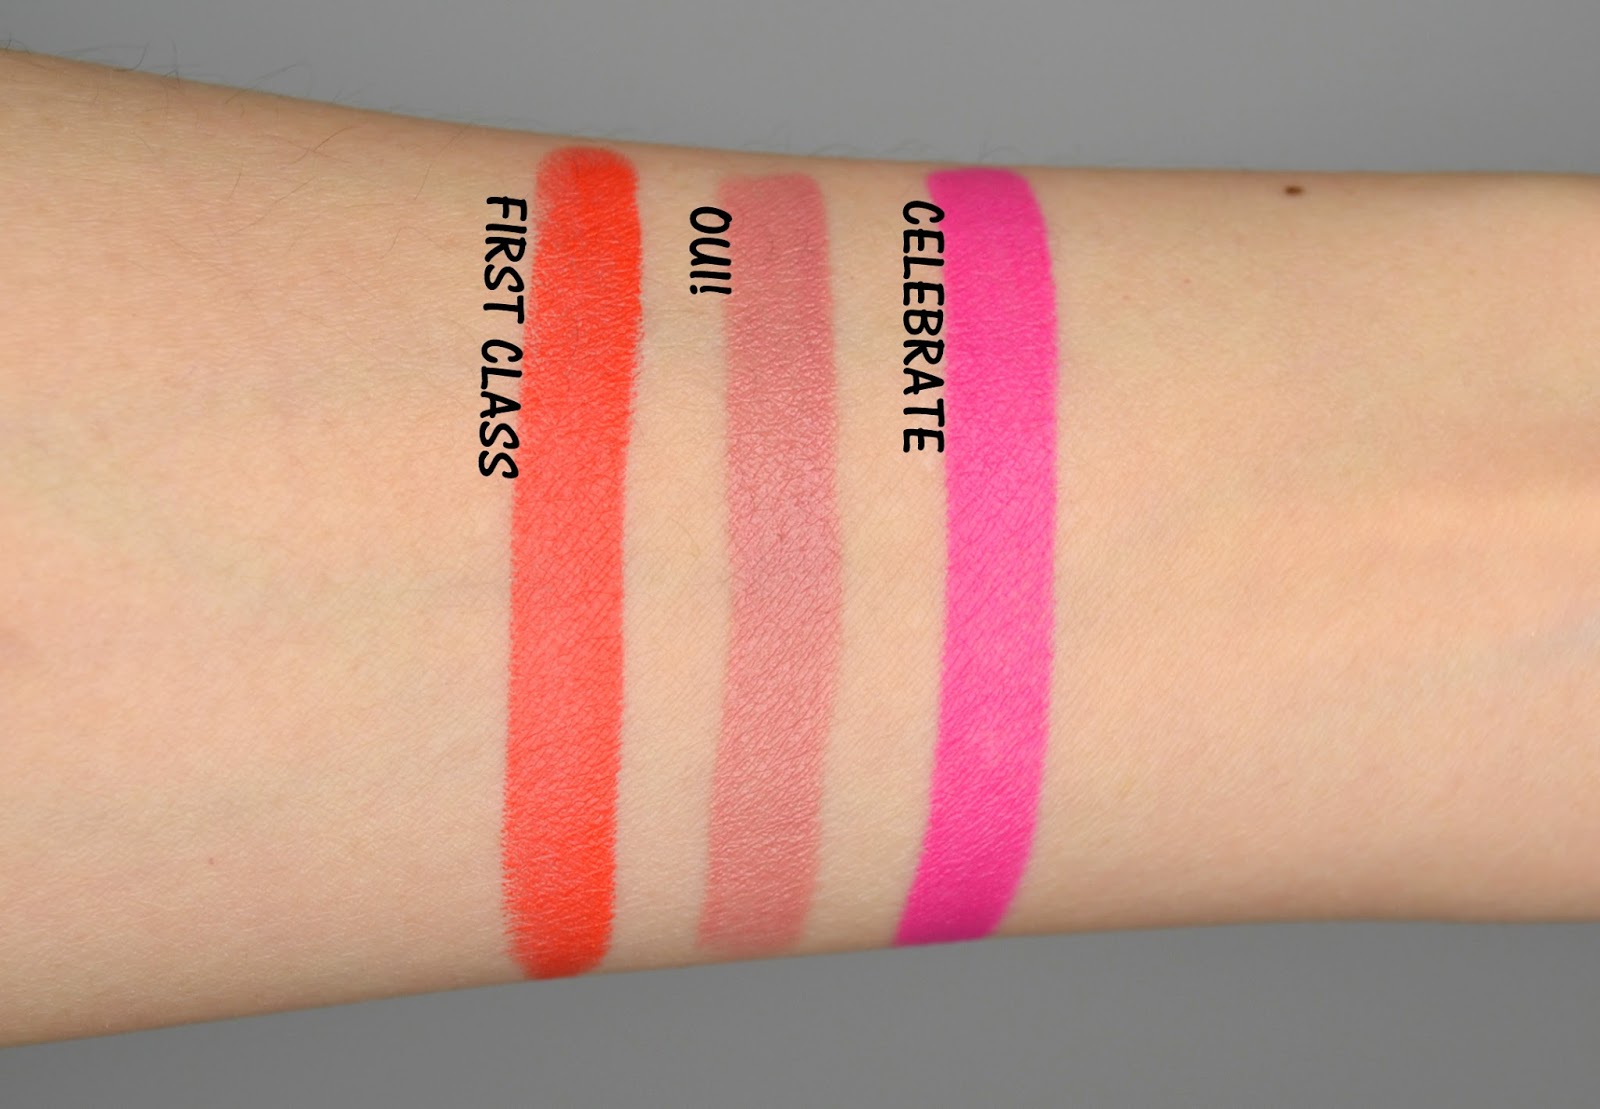 MAKEUP SEPHORA COLLECTION #Lipstories Lipstick with Lip Swatches.